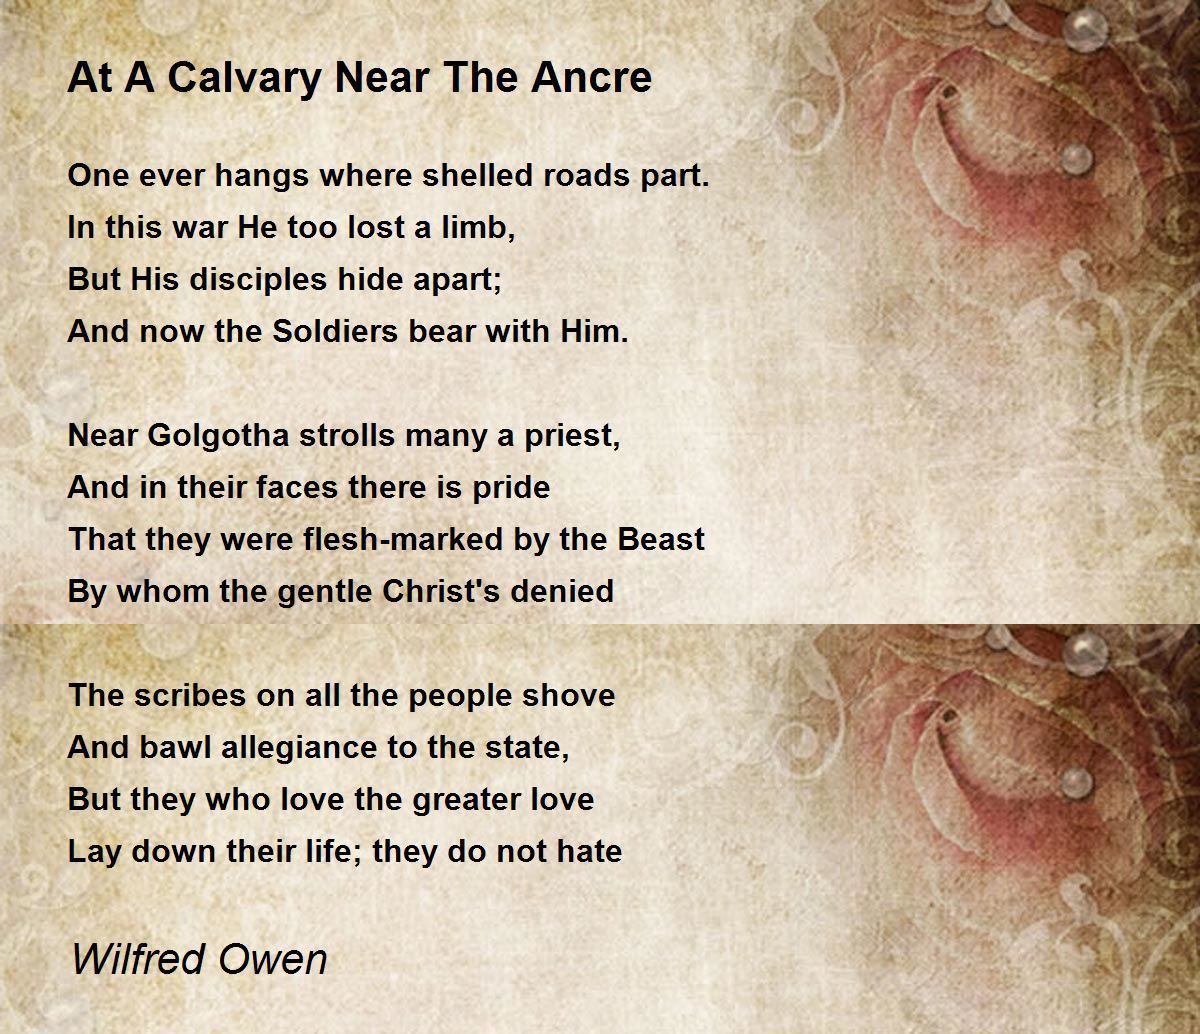 At A Calvary Near The Ancre Poem by Wilfred Owen - Poem Hunter